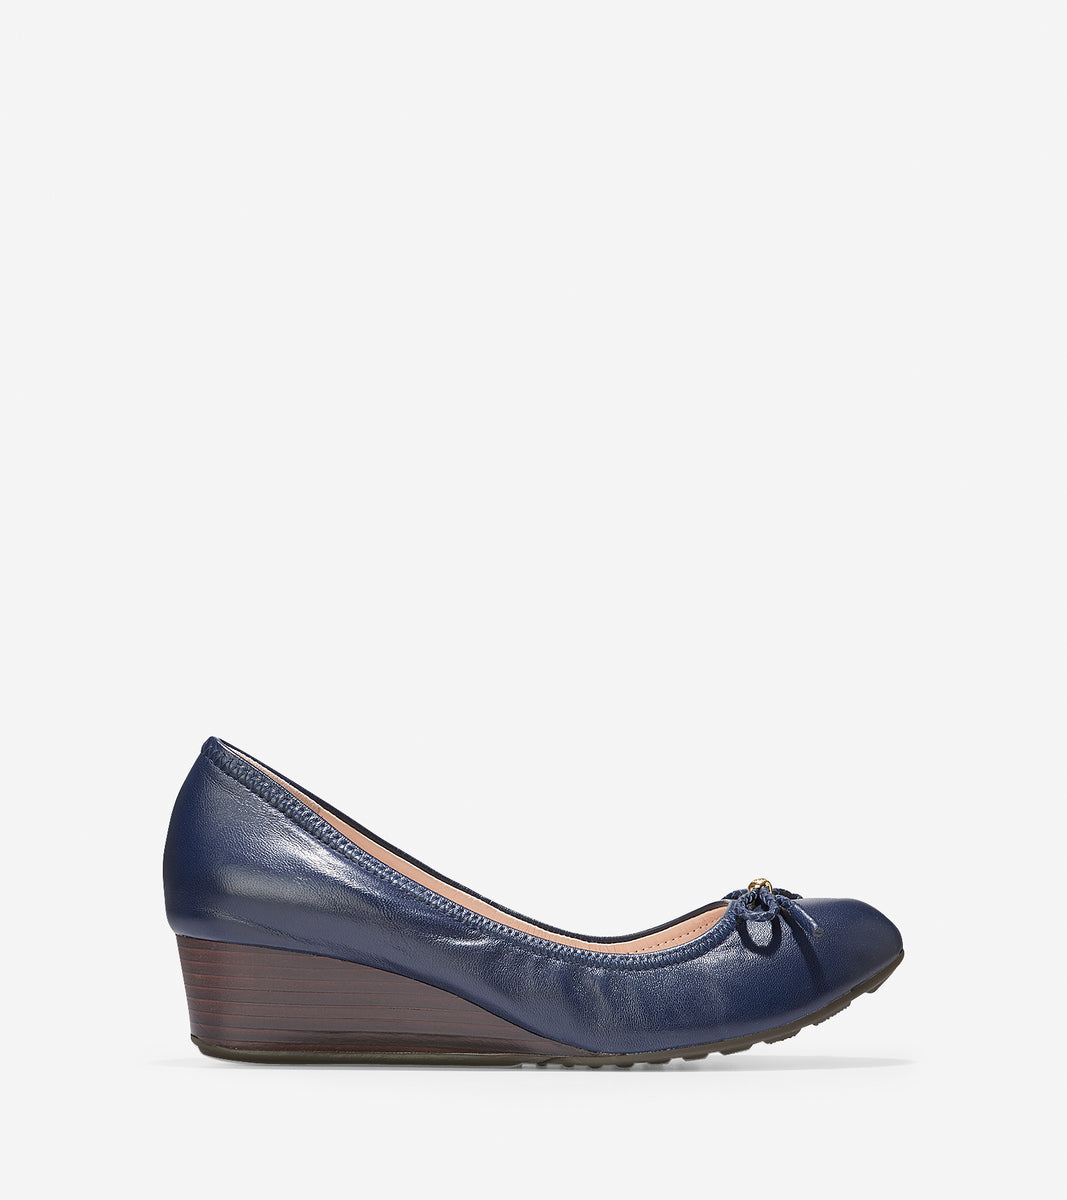 ColeHaan-Tali Grand Lace Wedge (40mm)-w00032-Blazer Blue Leather